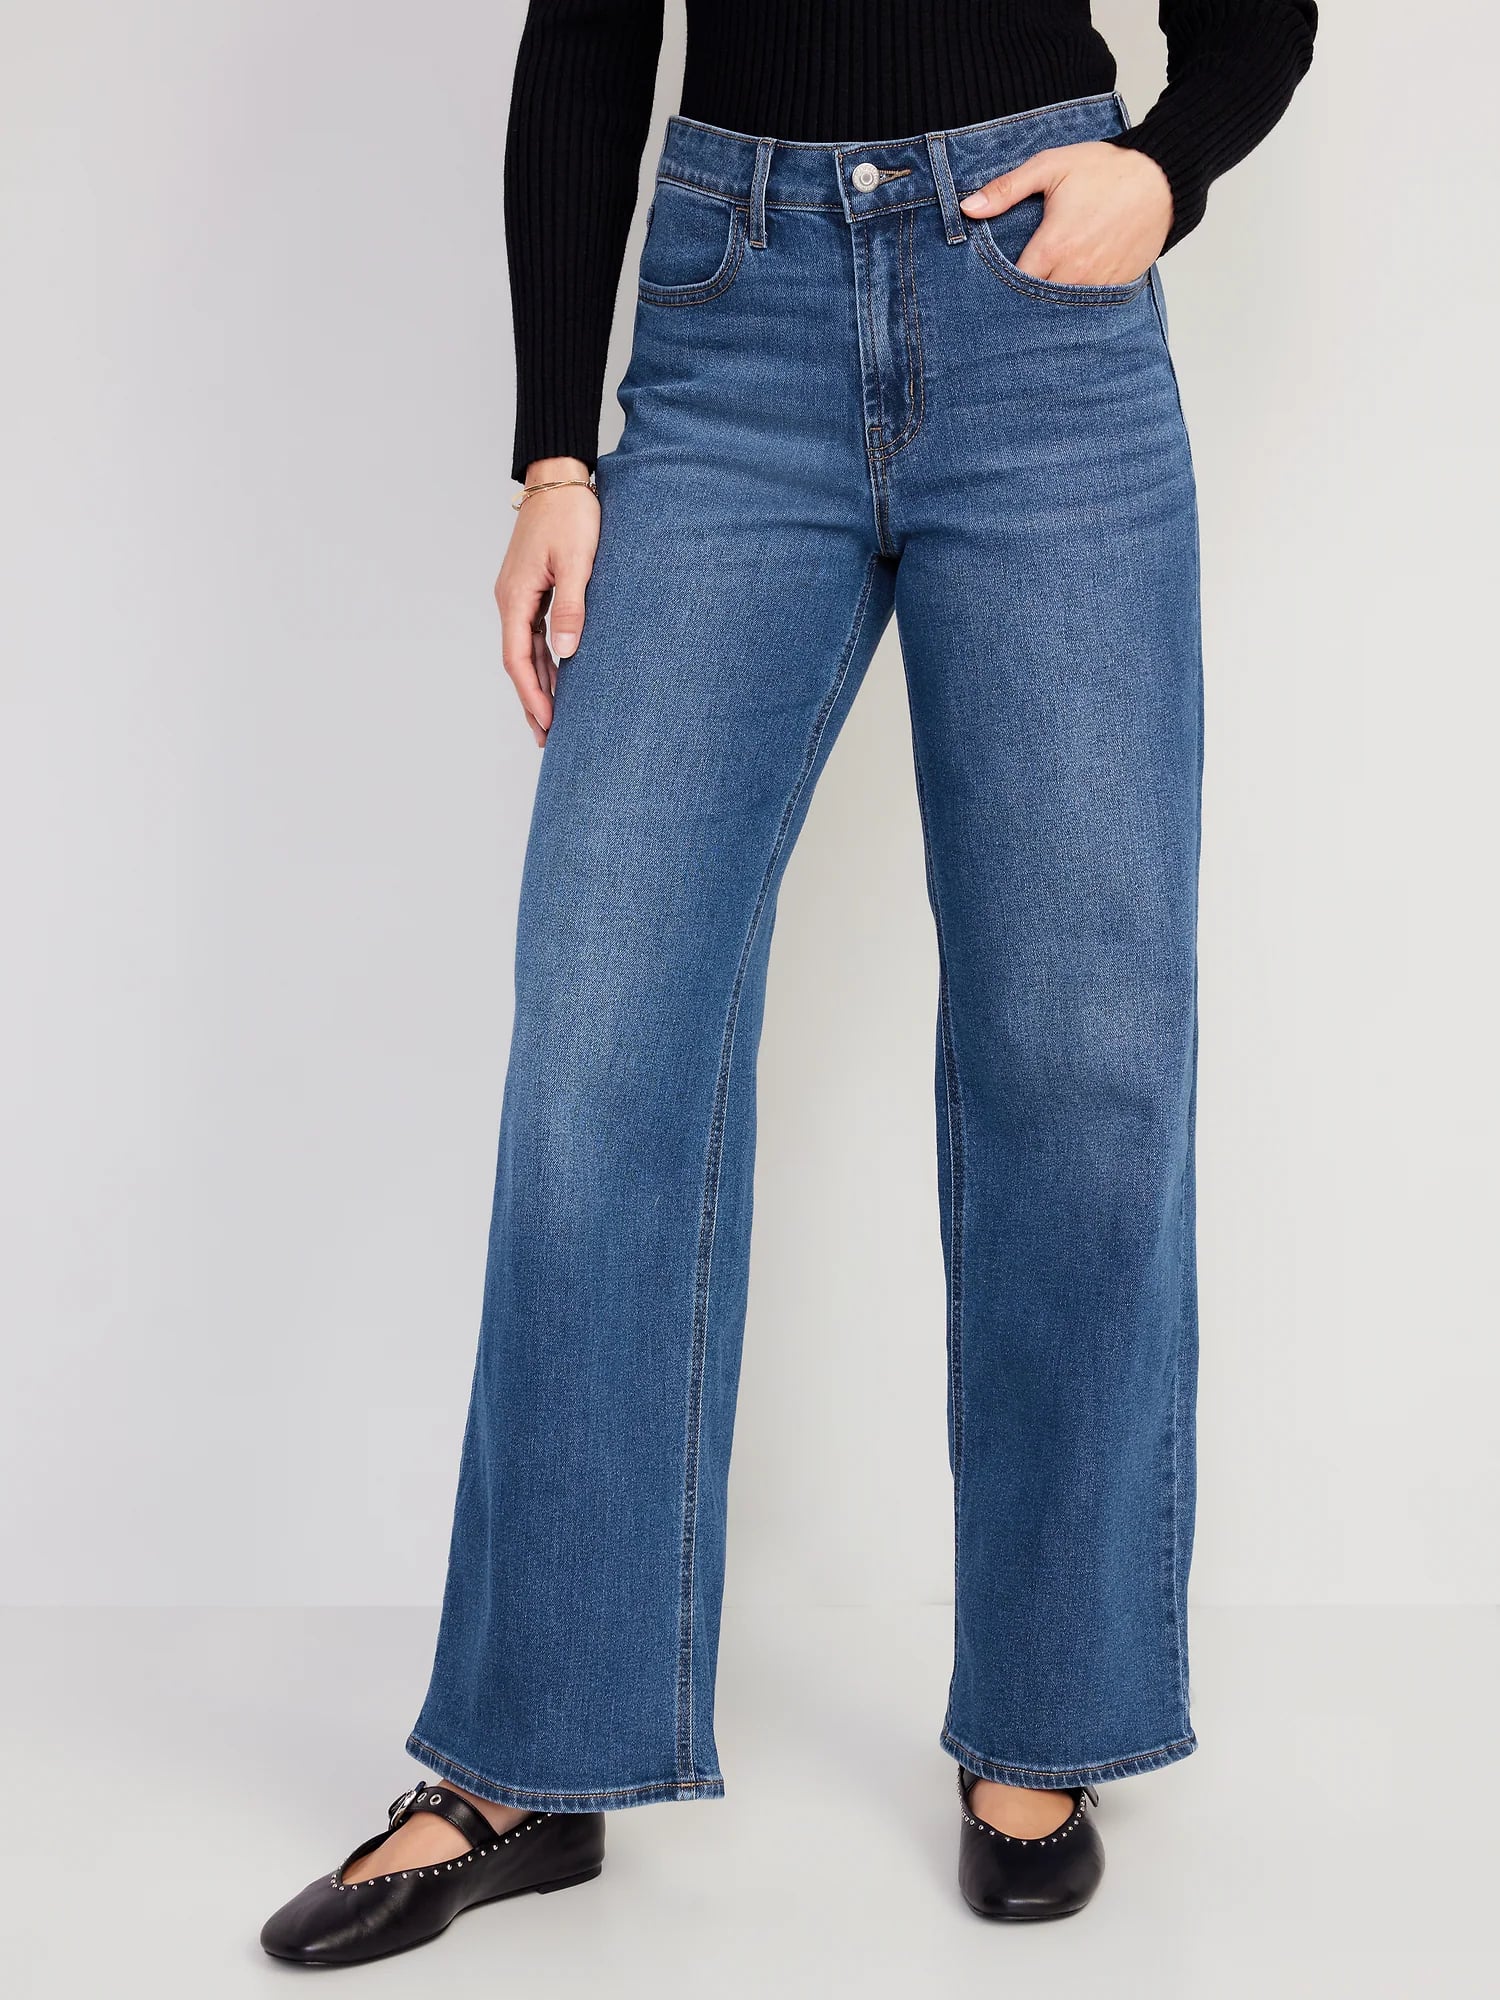 The Complete Wide Leg Jeans Guide for Petite Women - Petite Dressing